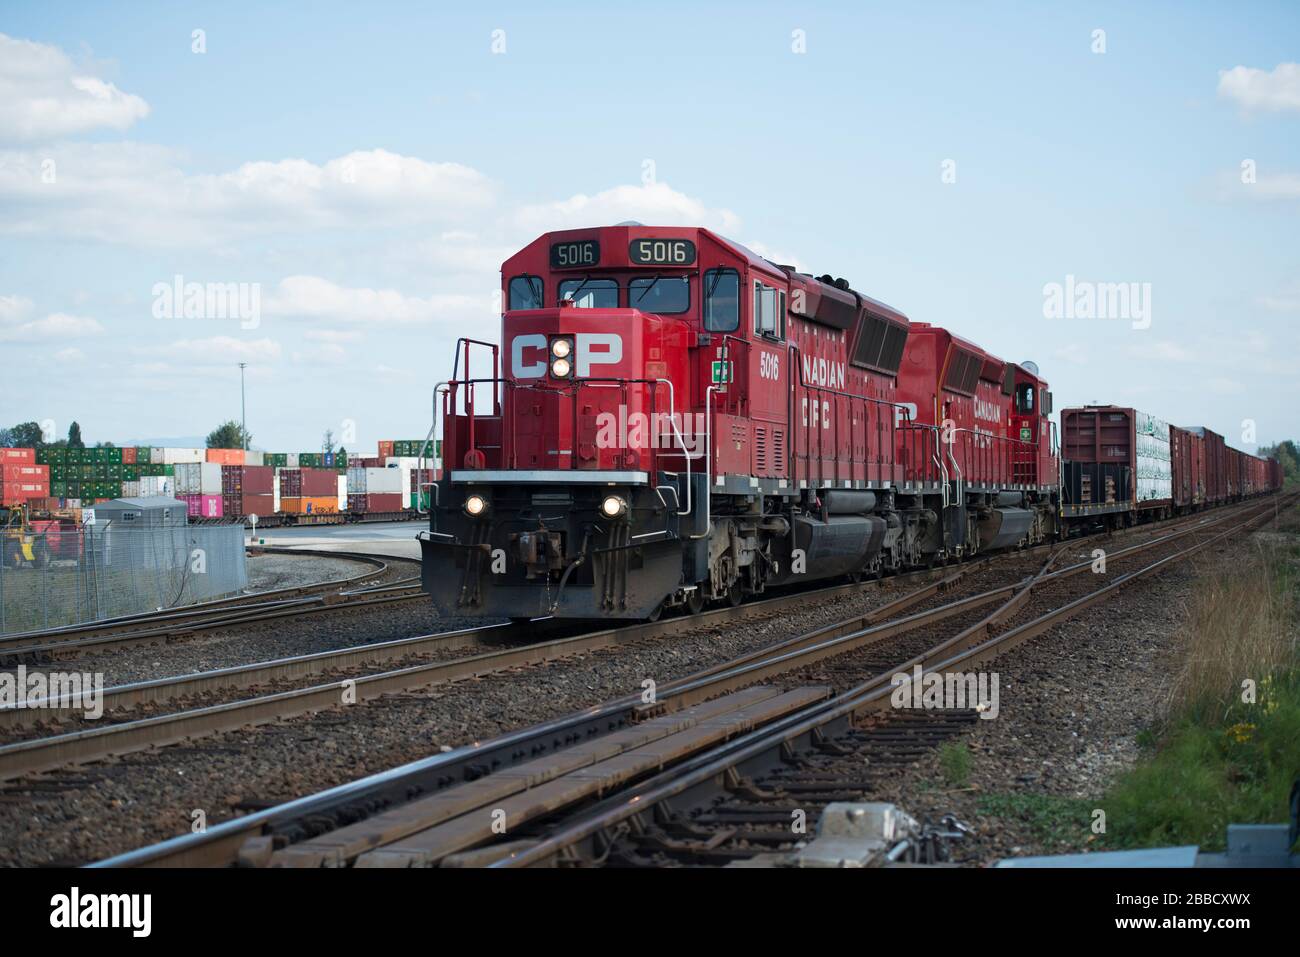 A CP (Canadian Pacific) train in Pitt Meadows, British Columbia, Canada Stock Photo